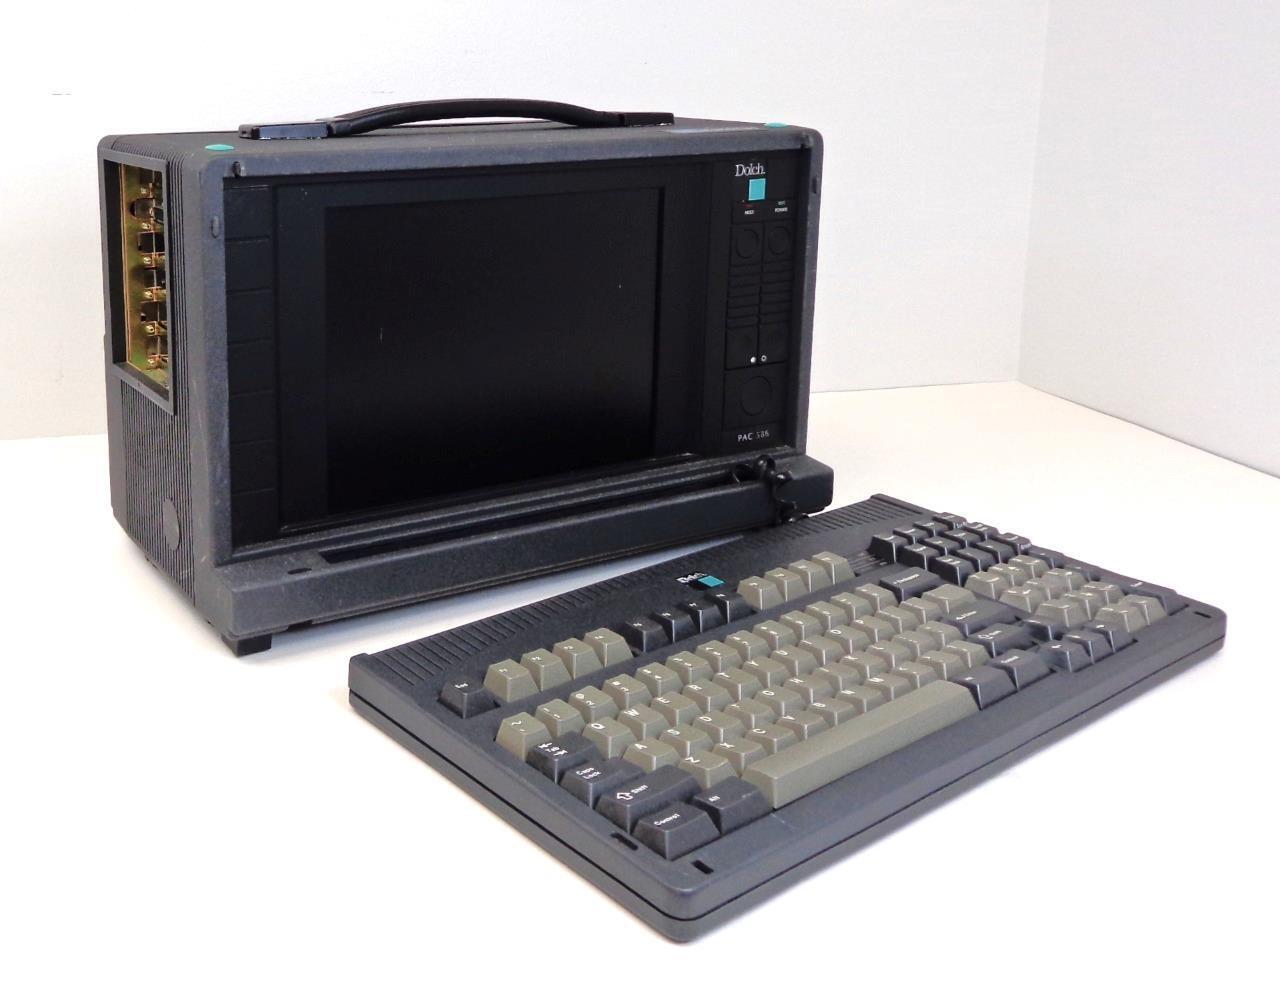 Dolch PAC 586 General Network Sniffer